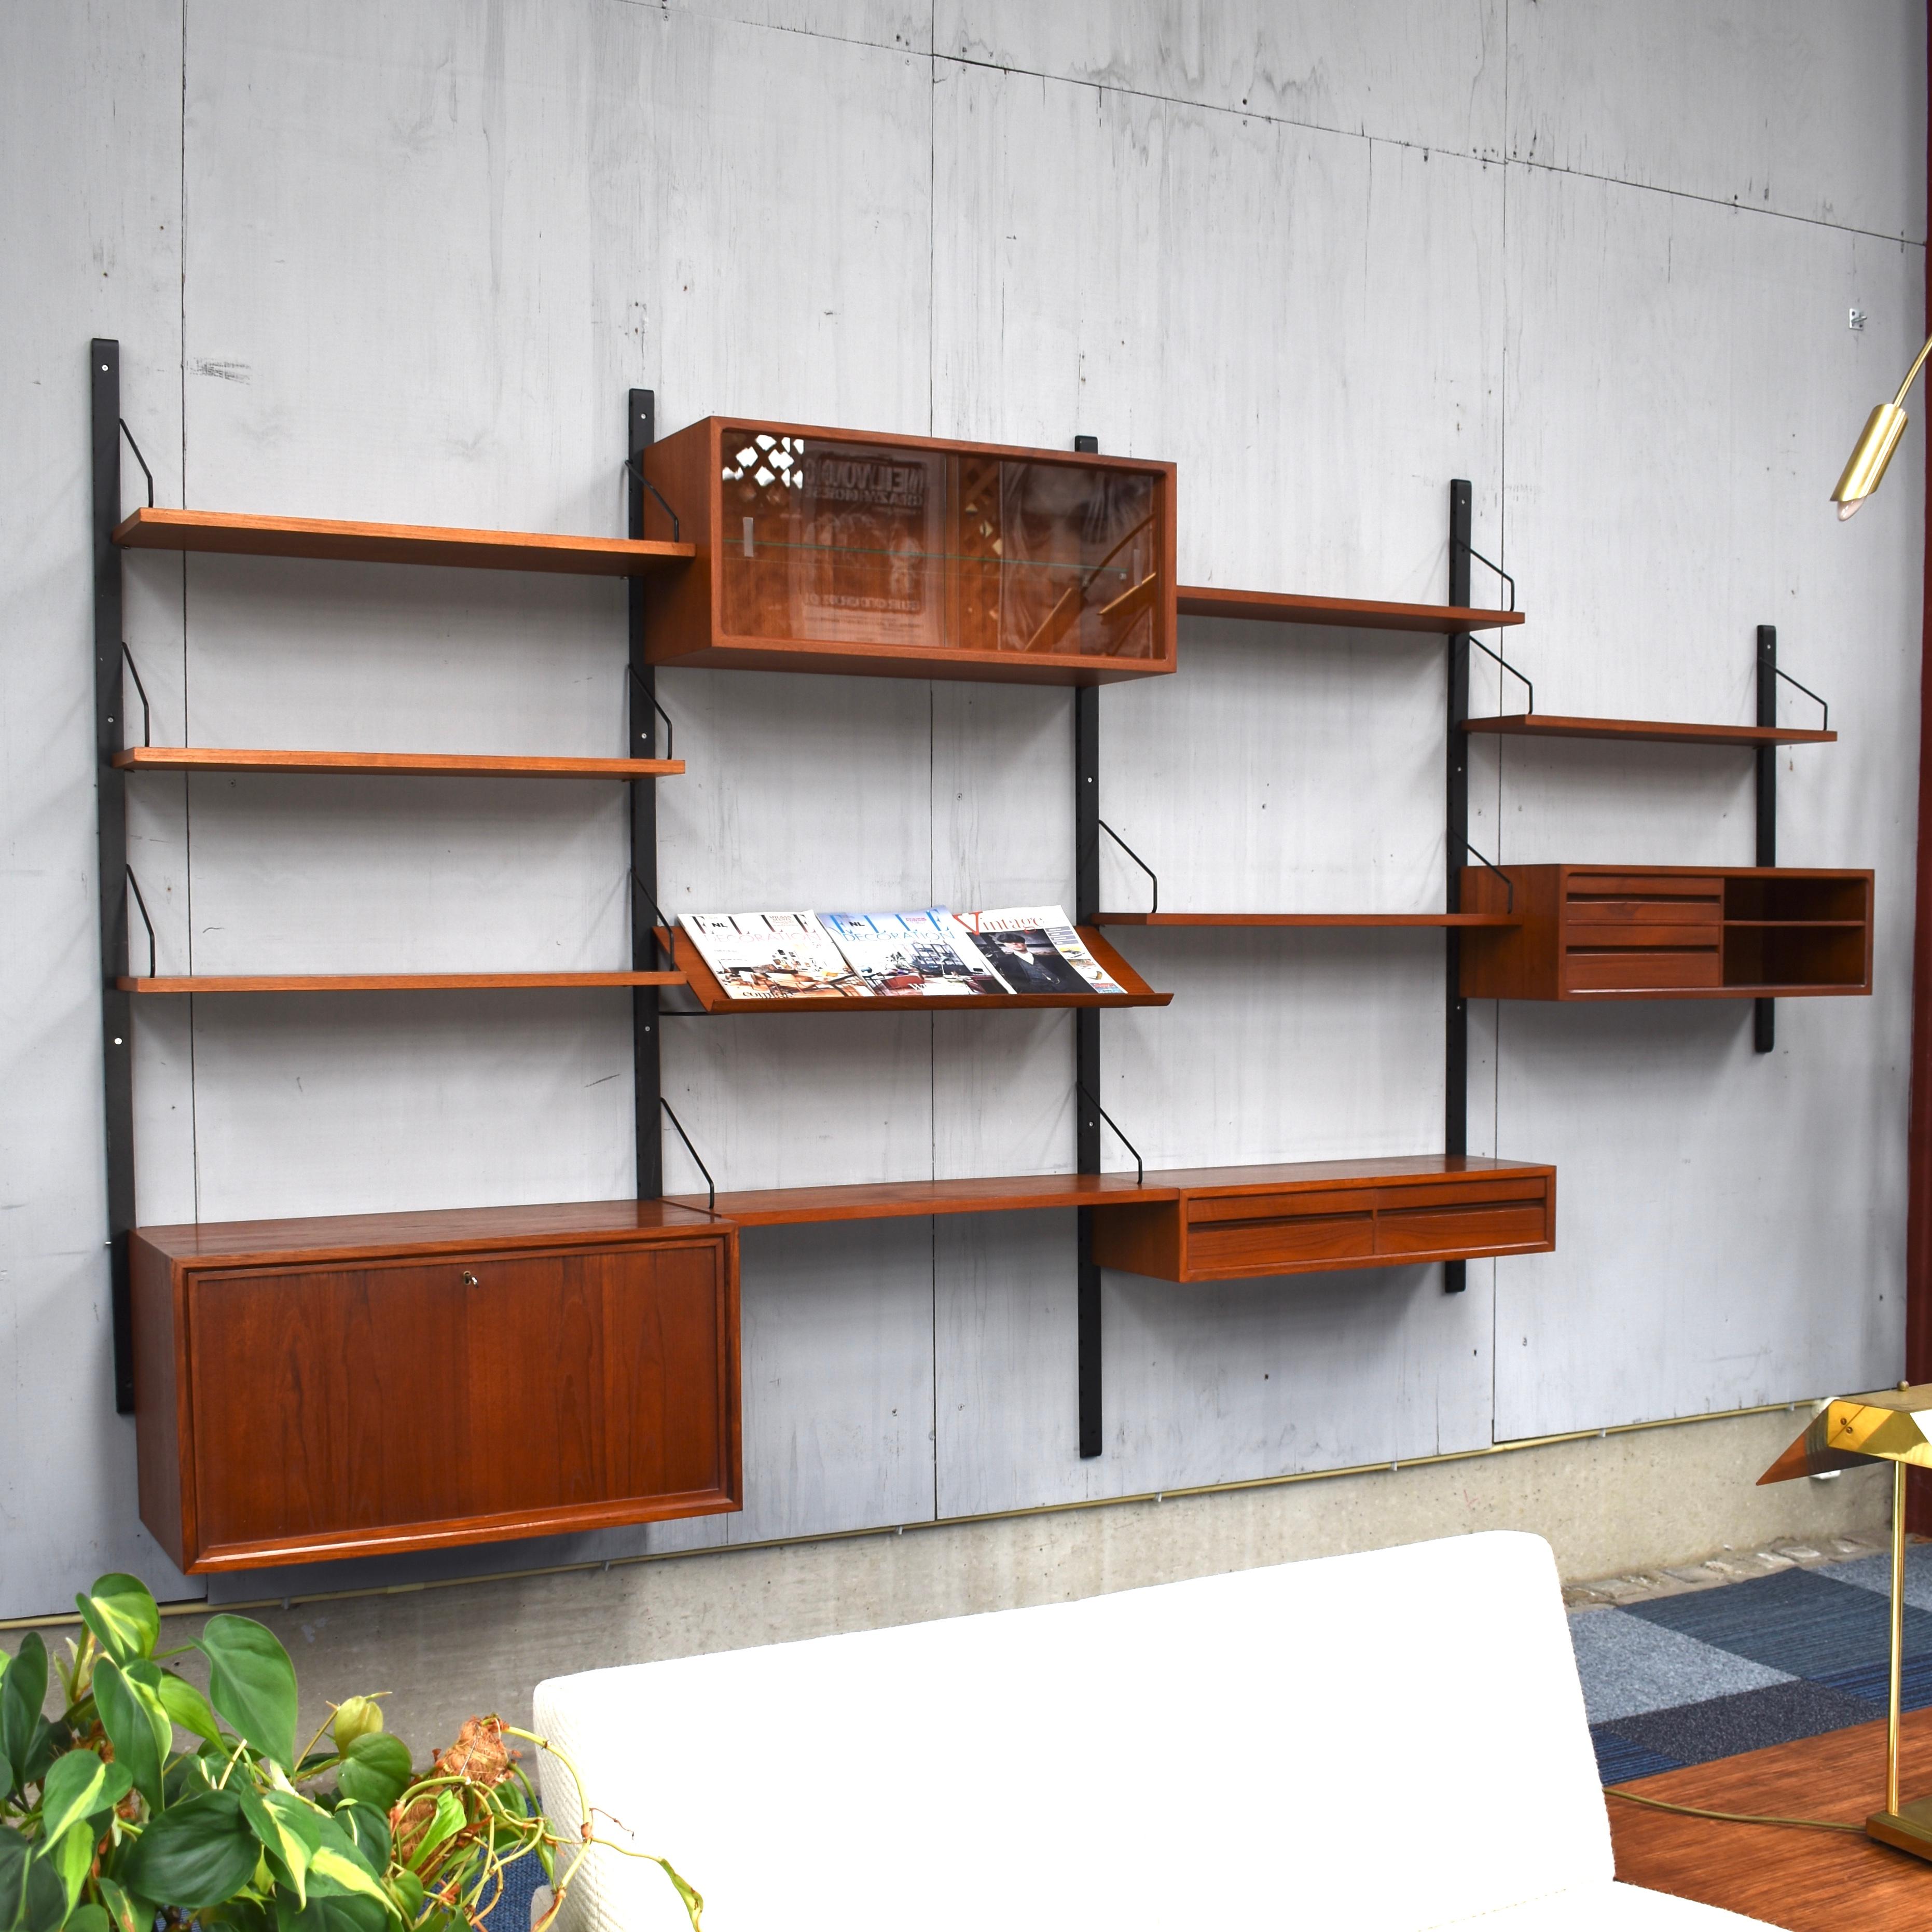 Beautiful Royal series wall unit by Poul Cadovius with much wanted angled lecture shelve. In a beautiful warm wood color and in good condition. The system is modular so it can be arranged to your own liking or expanded with extra units.

This unit